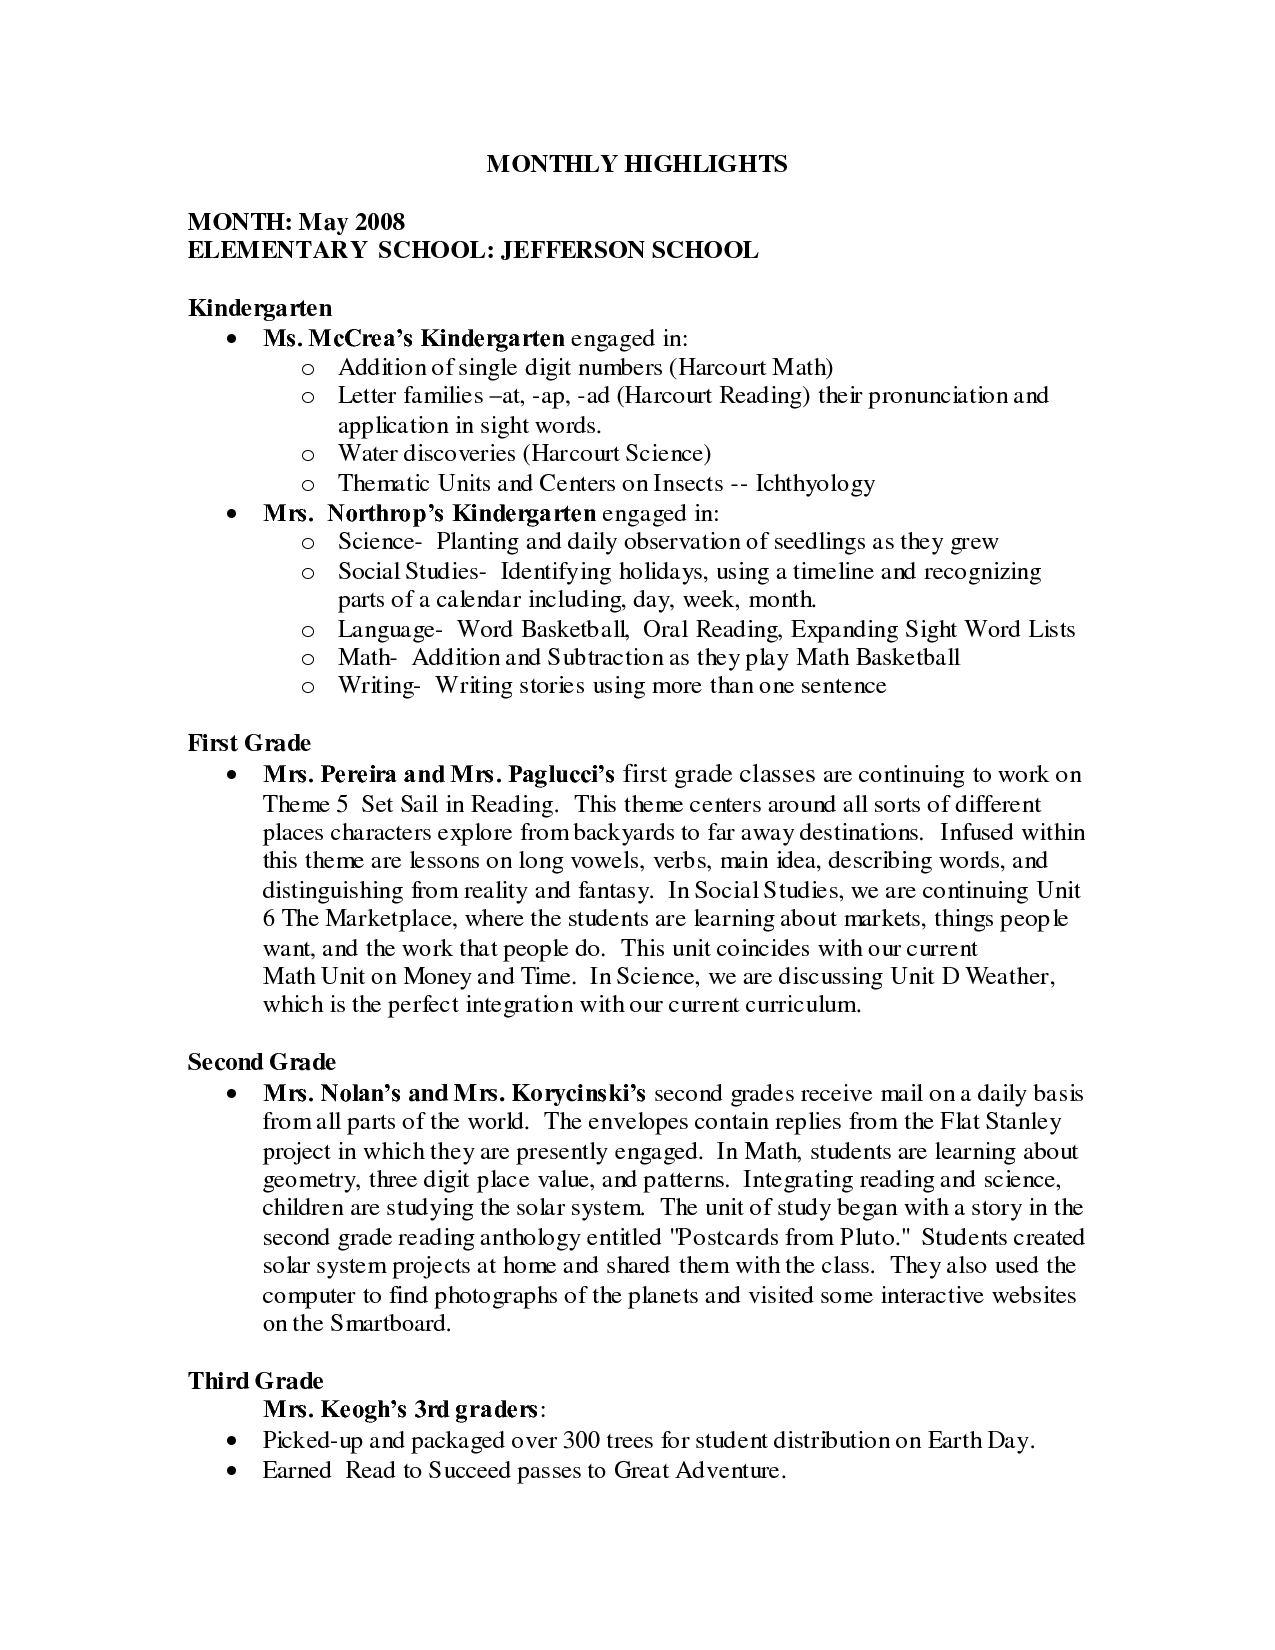 Book Report Example College Best Photos Of Format Printable Throughout College Book Report Template